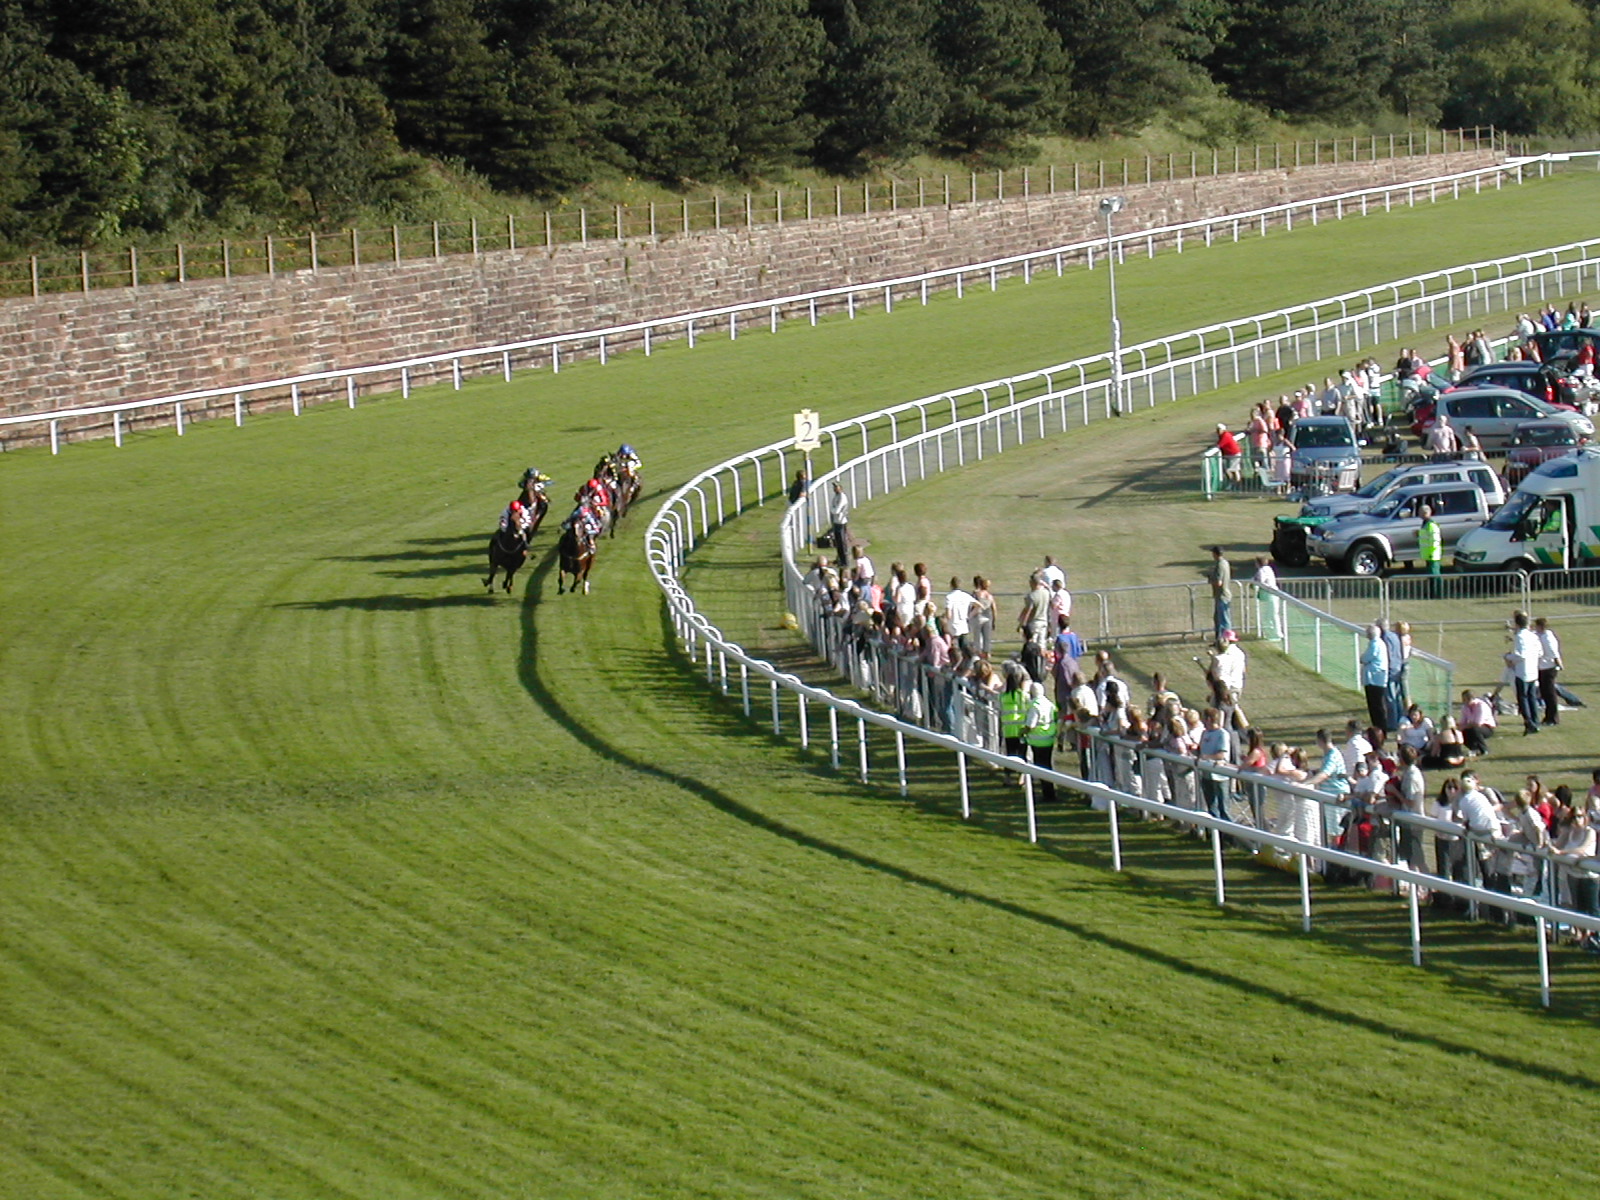 File:Racecourse In Chester3.jpg - Wikimedia Commons